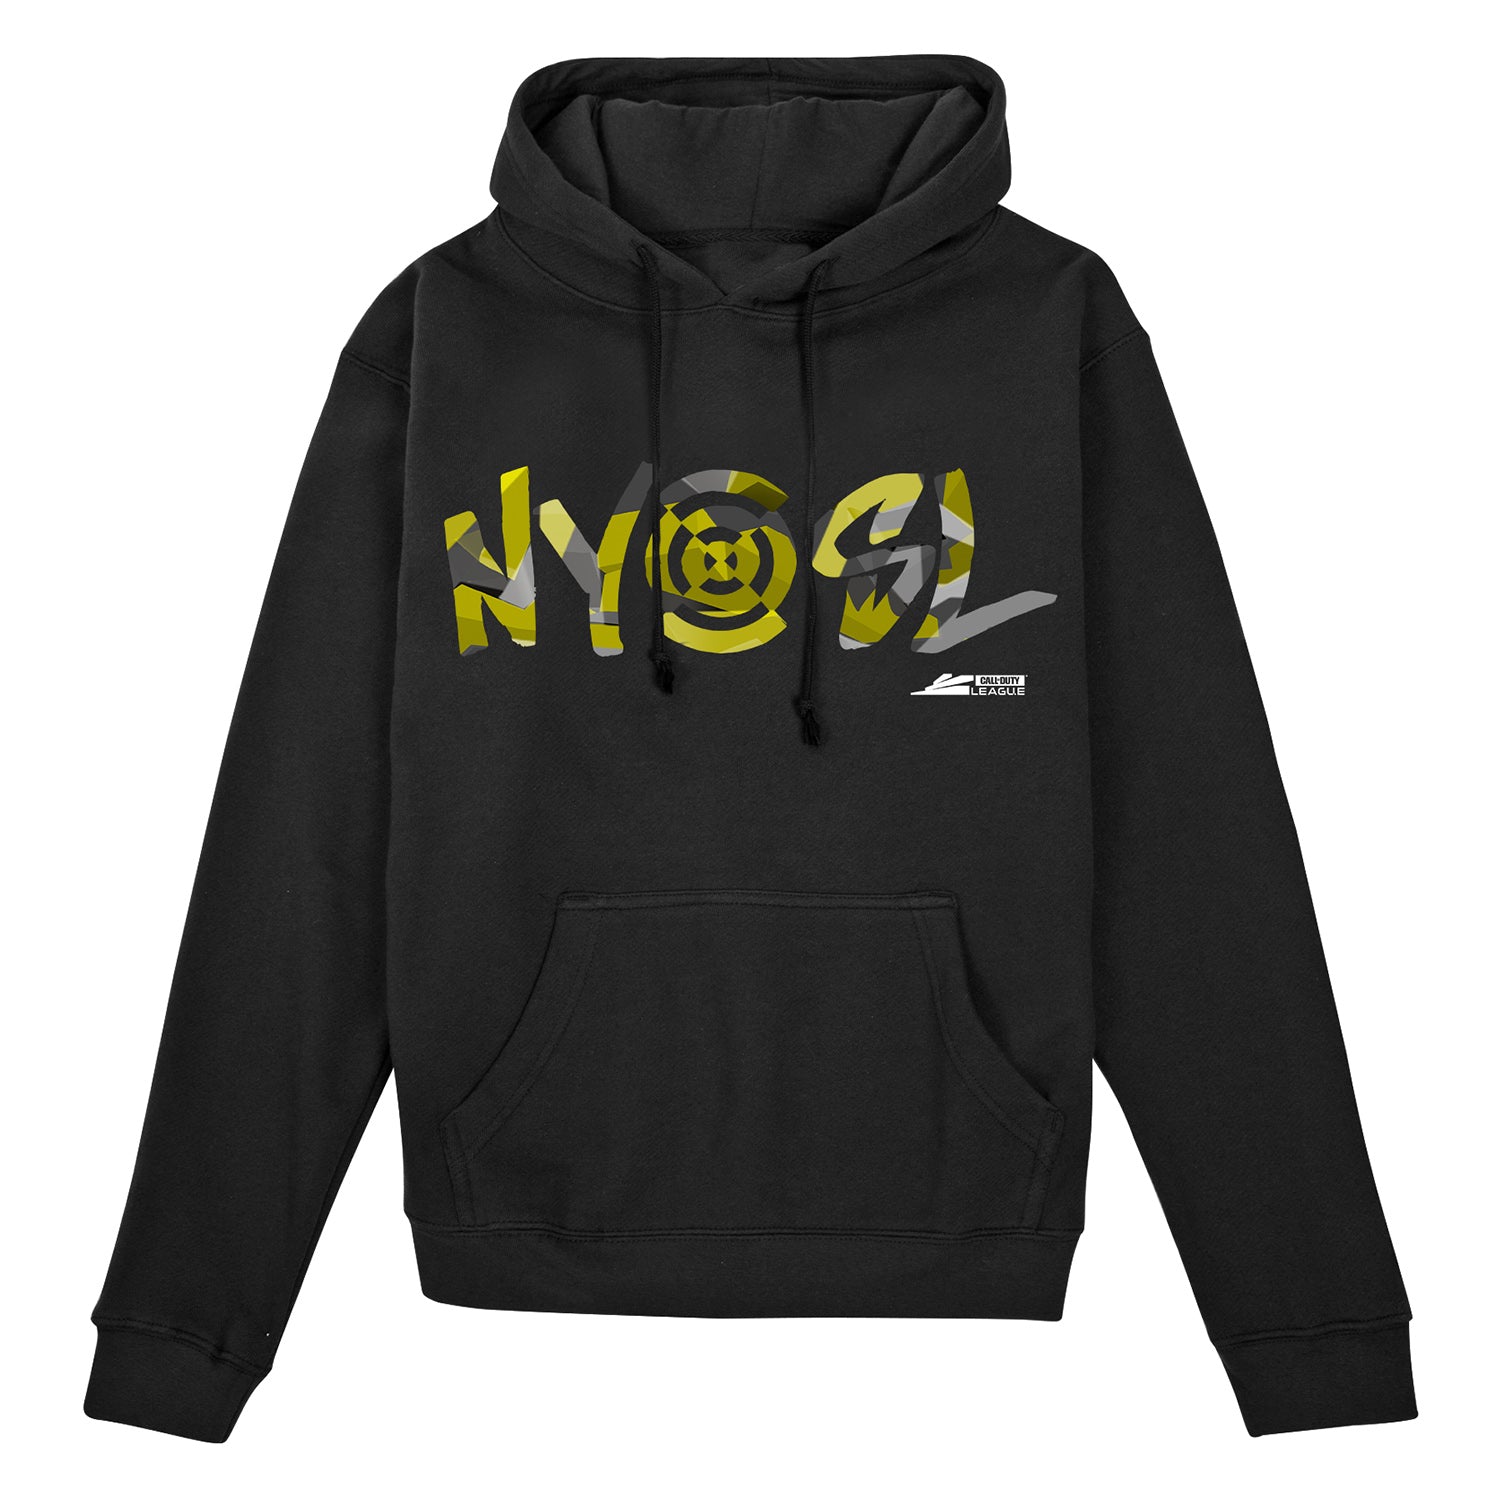 New York Subliners Black Camo Hoodie - Front View